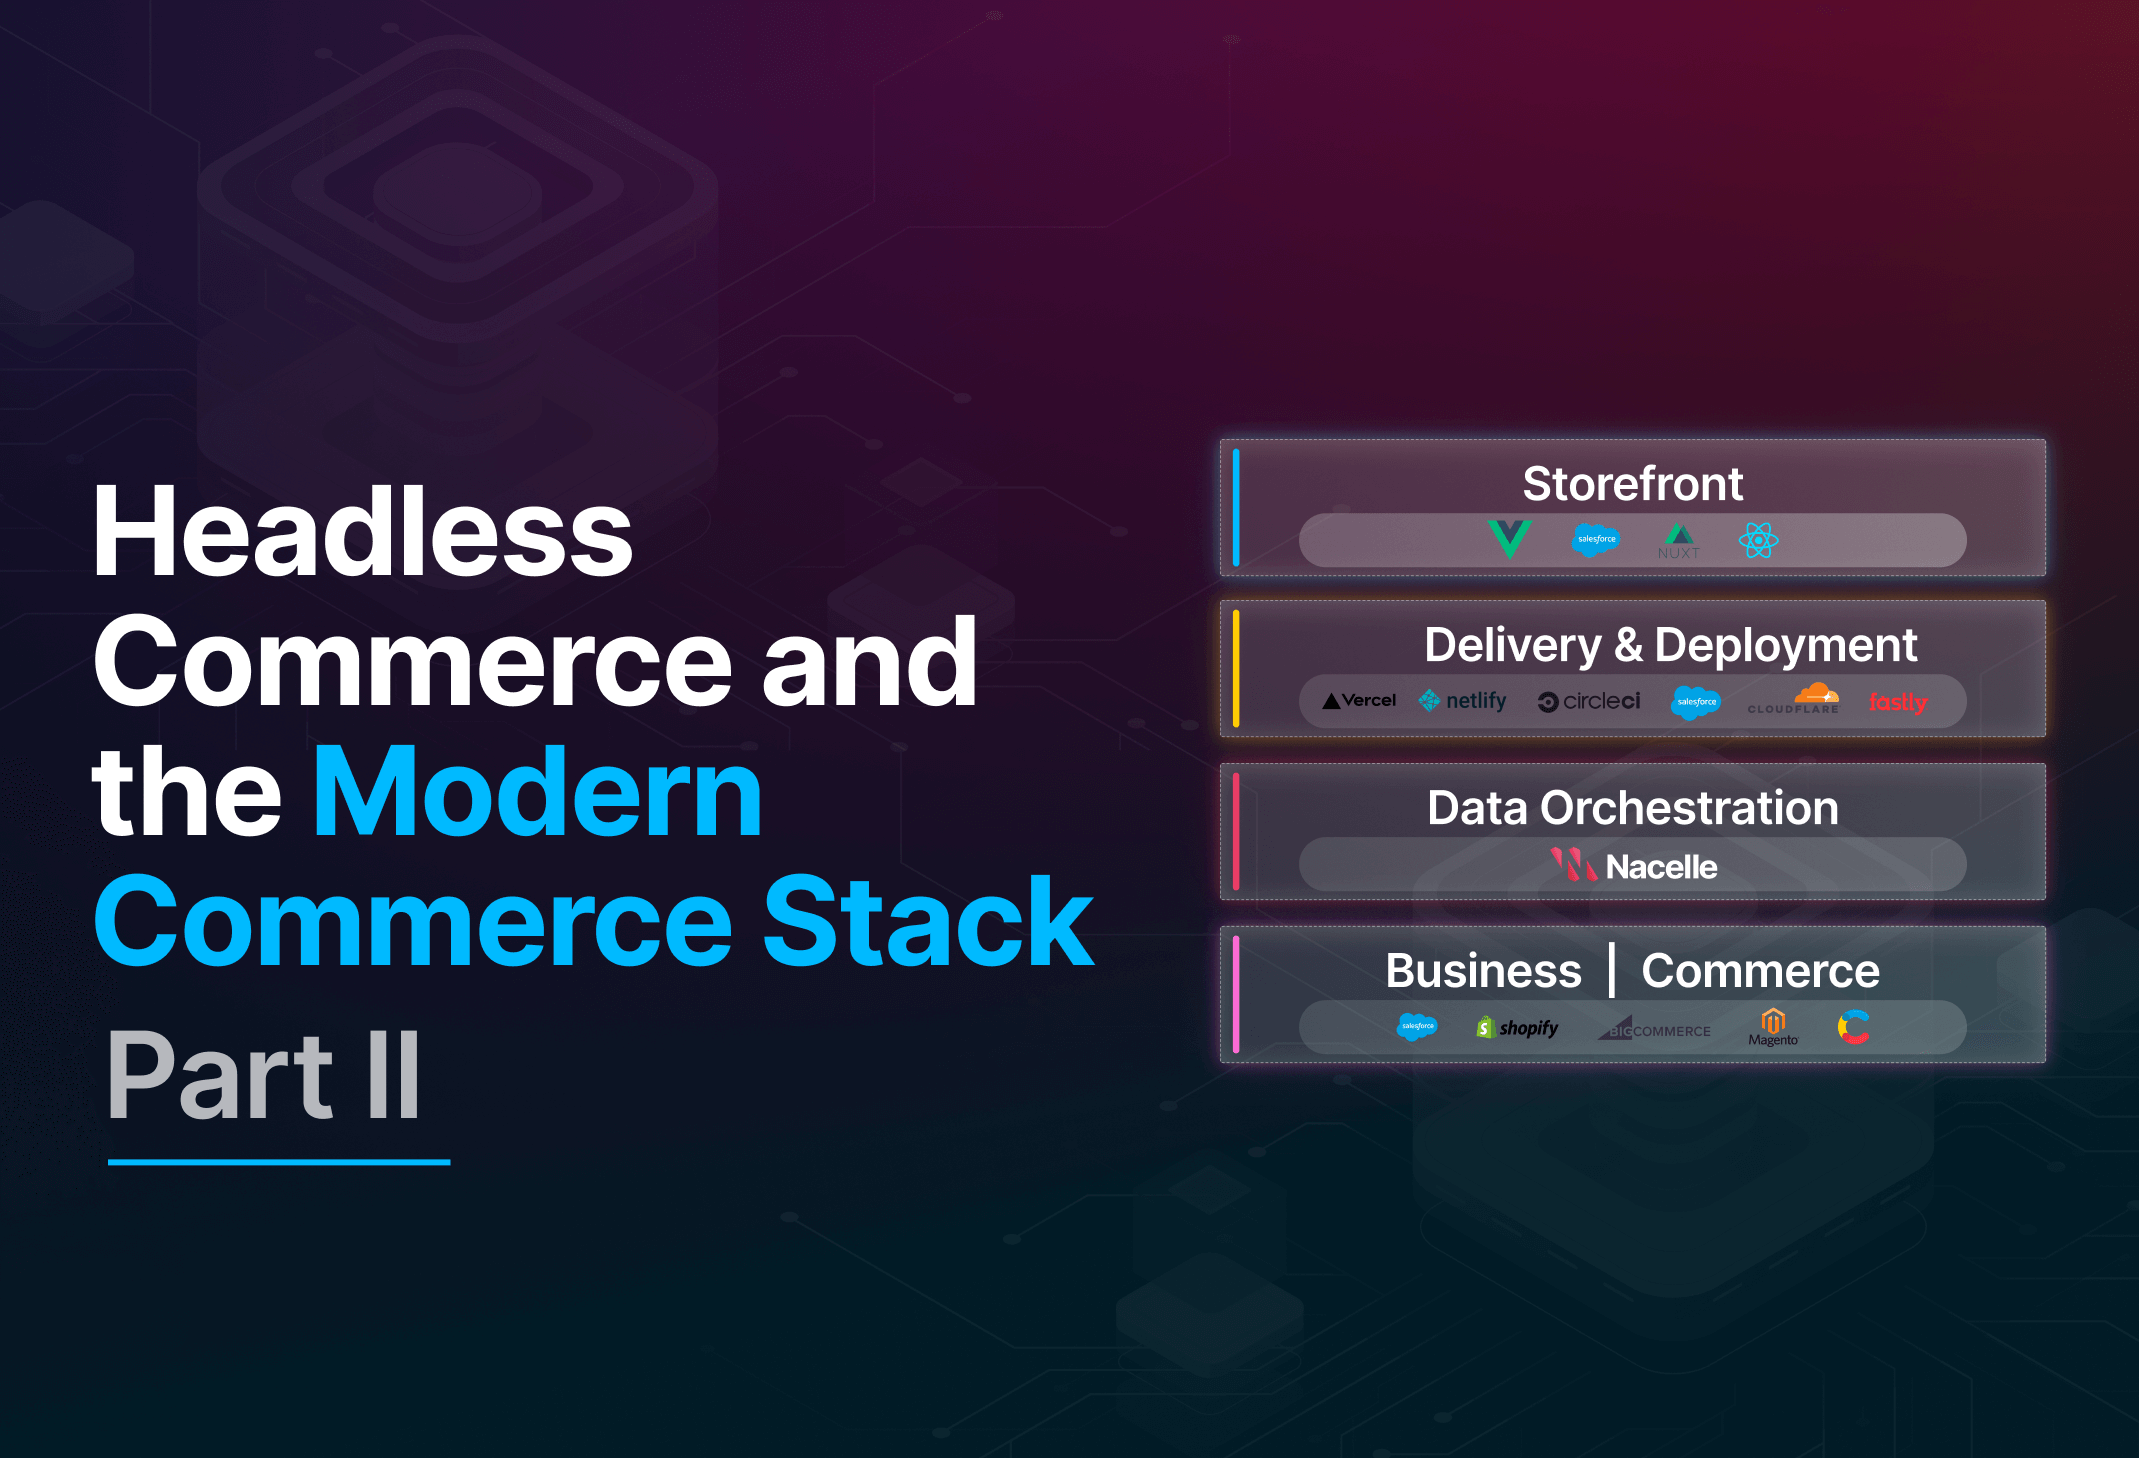  Modern commerce stack tools are laser focused (part II of III) 